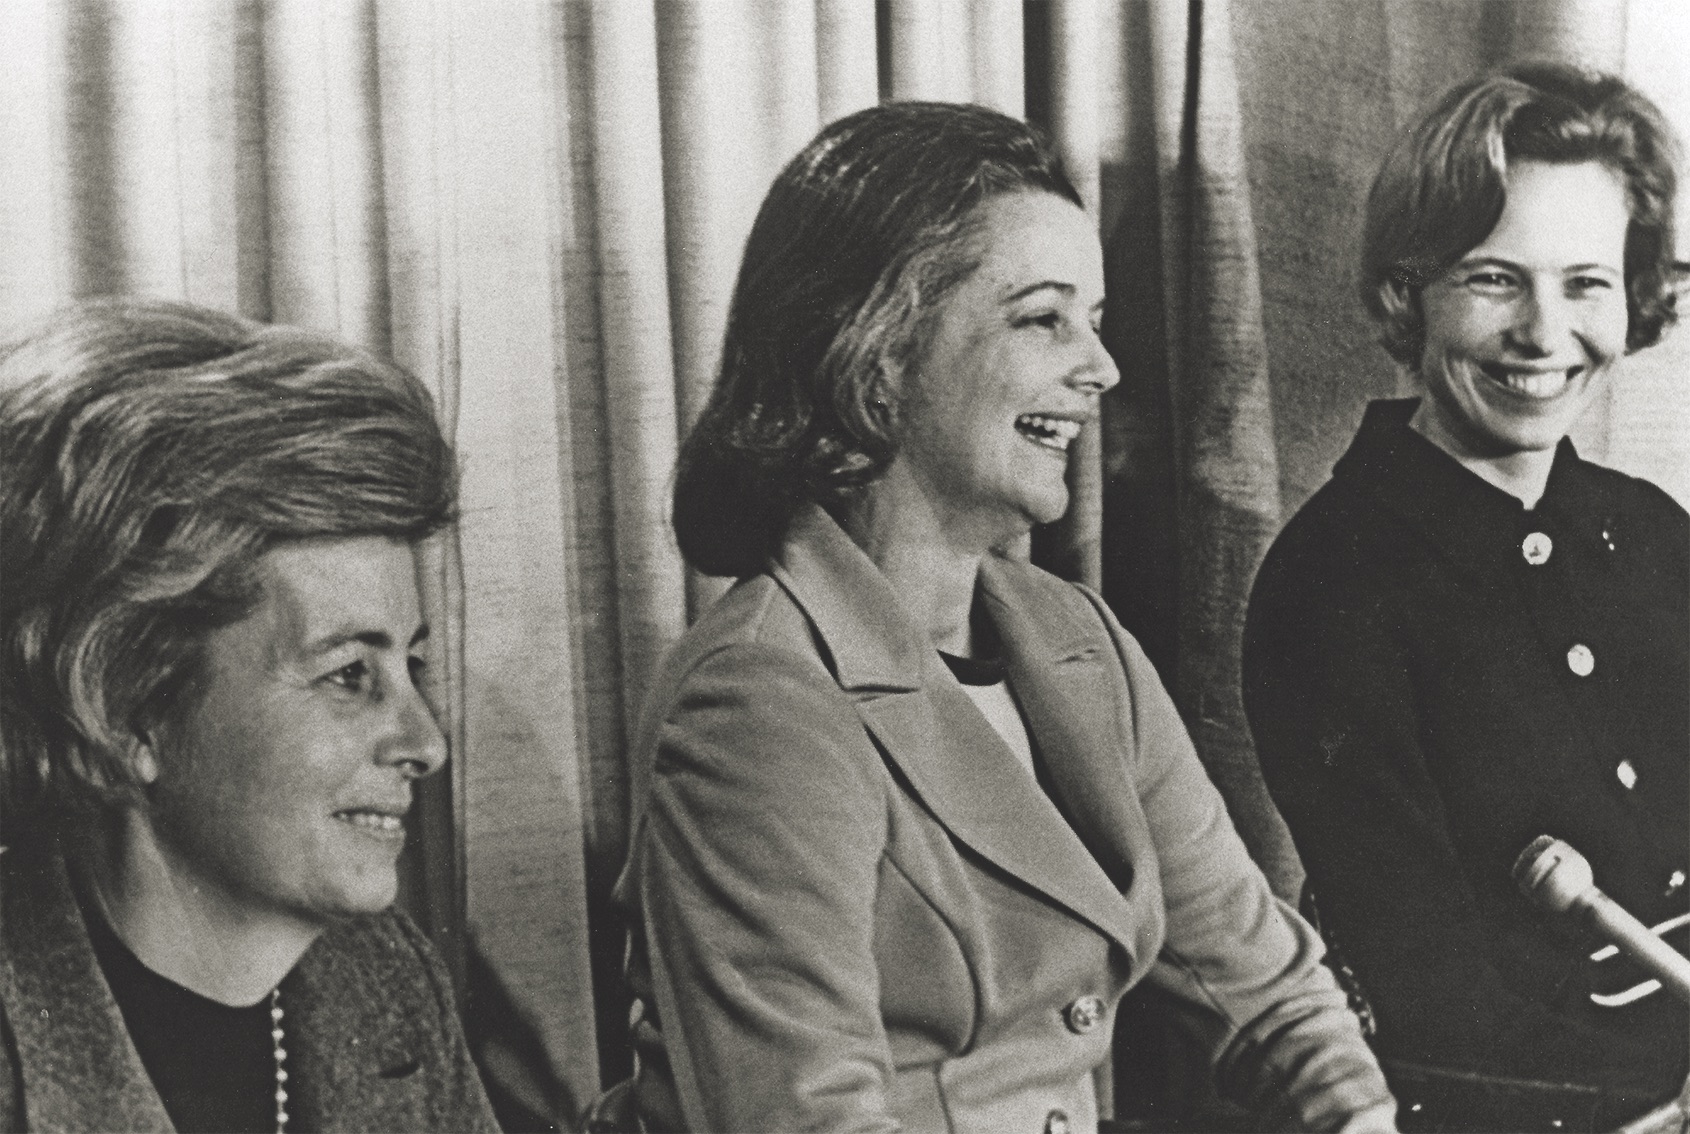 East Coast leaders of the wives’ league, shown in 1973, included, from left, Louise Mulligan, Jane Denton and Phyllis Galanti. (Denton Family Photos)